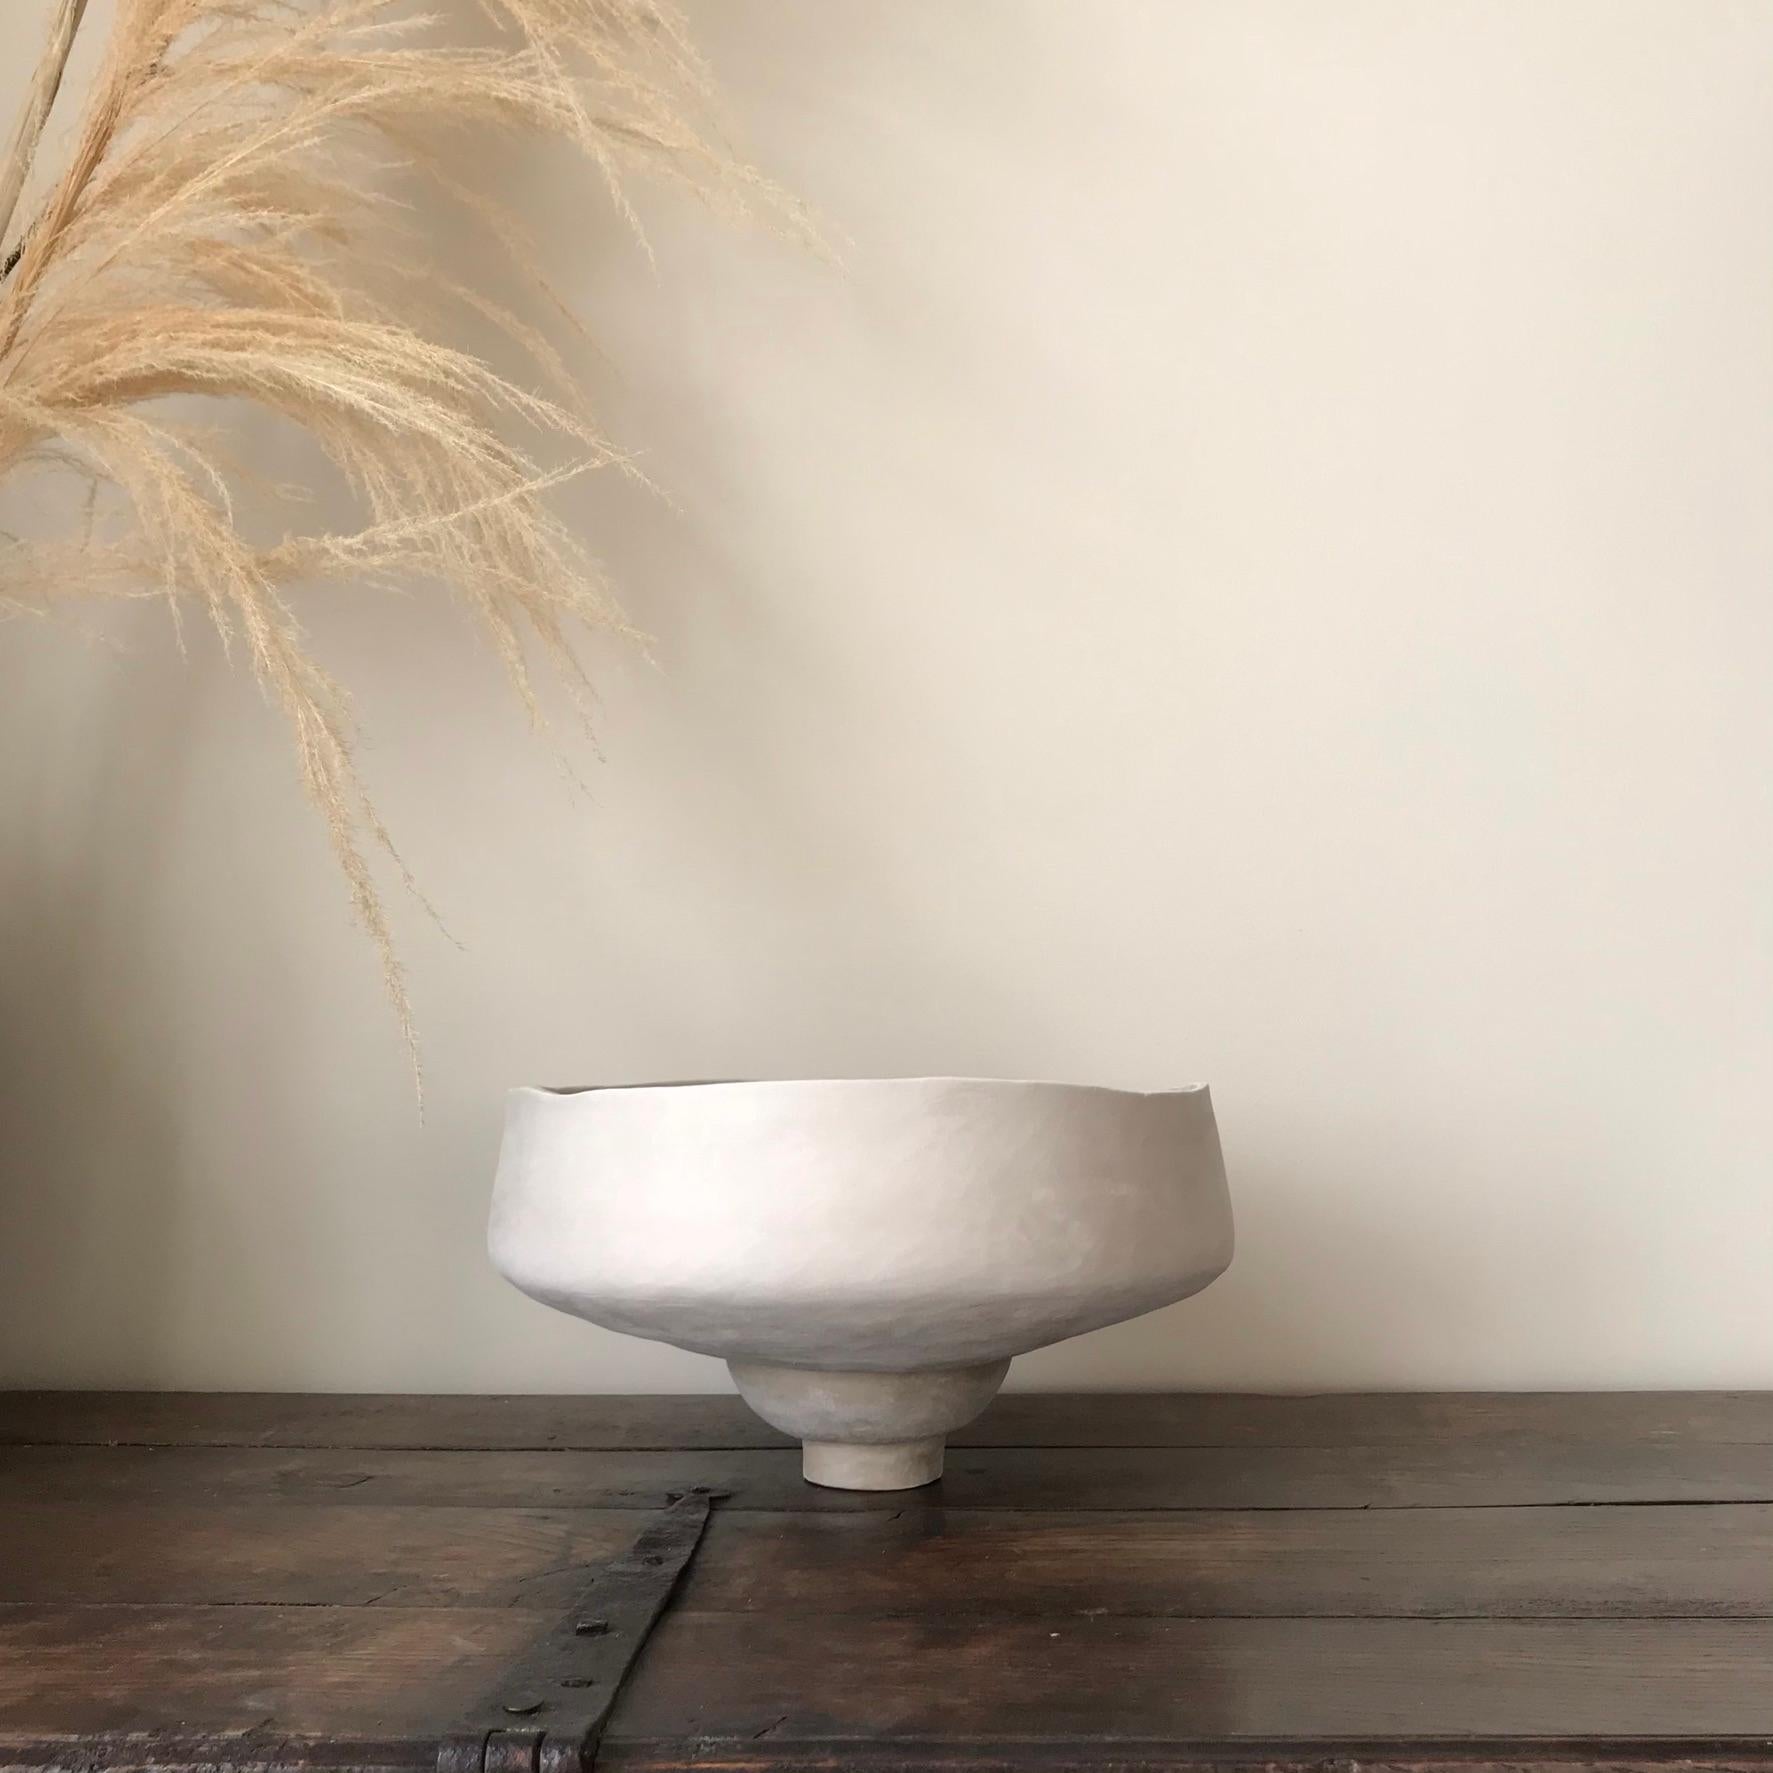 Each of Françoise Jeffrey's ceramic pieces is hand made, coil built, organically shaped and unique in their own way, thus creating a basic and timeless design. Perfectly imperfect, inspired by the Japanese philosophy wabi-sabi.

For Jeffrey less is